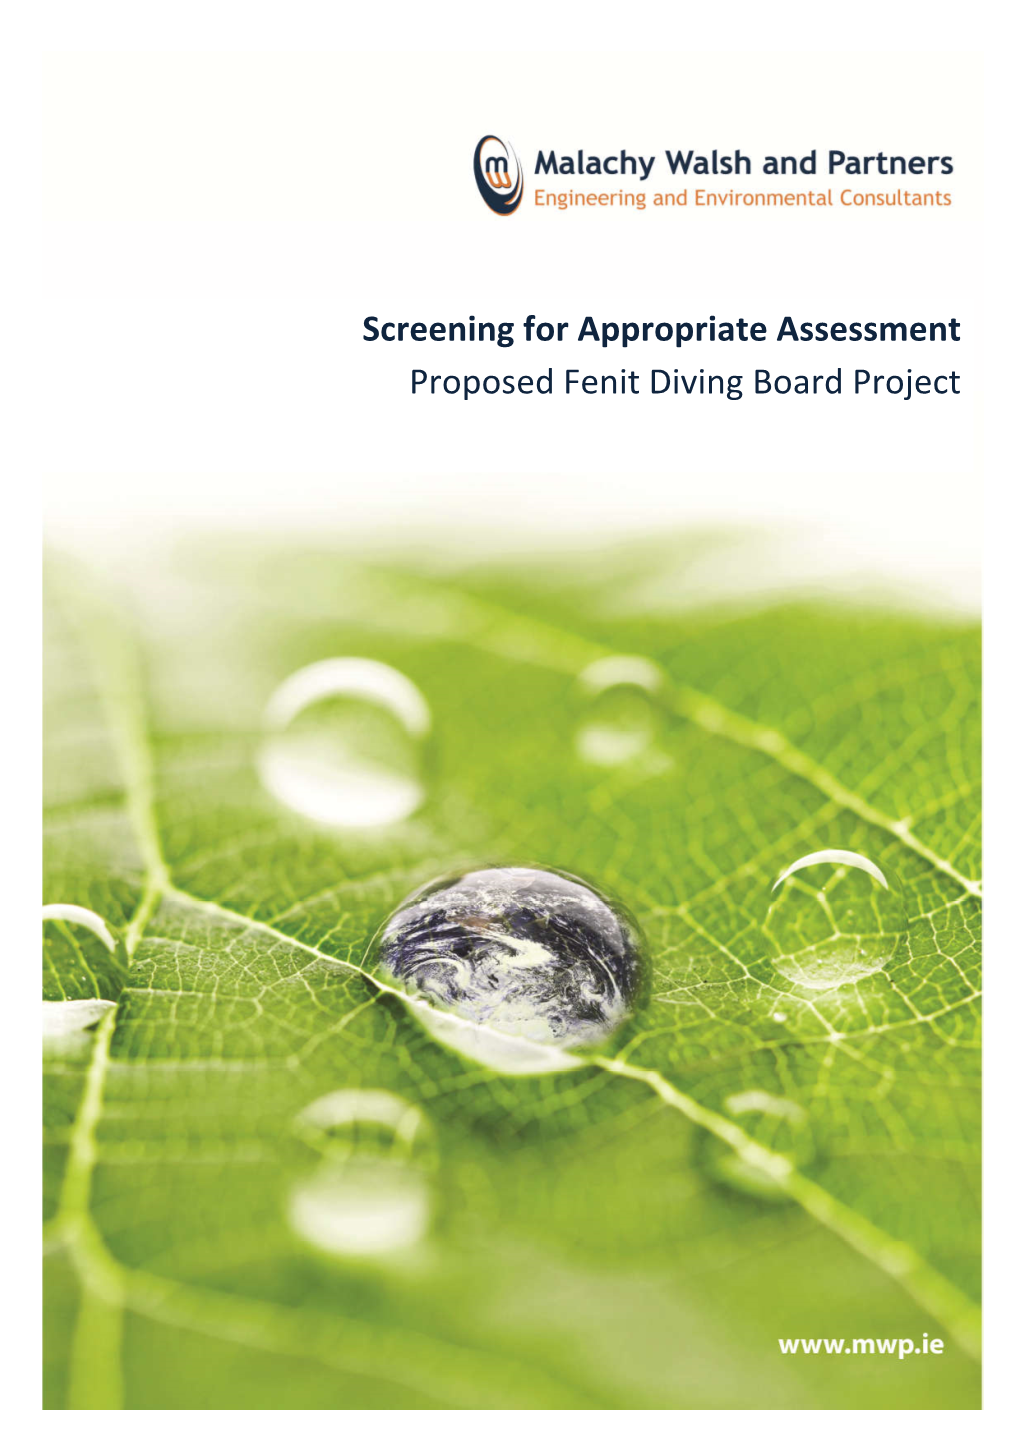 Screening for Appropriate Assessment Proposed Fenit Diving Board Project